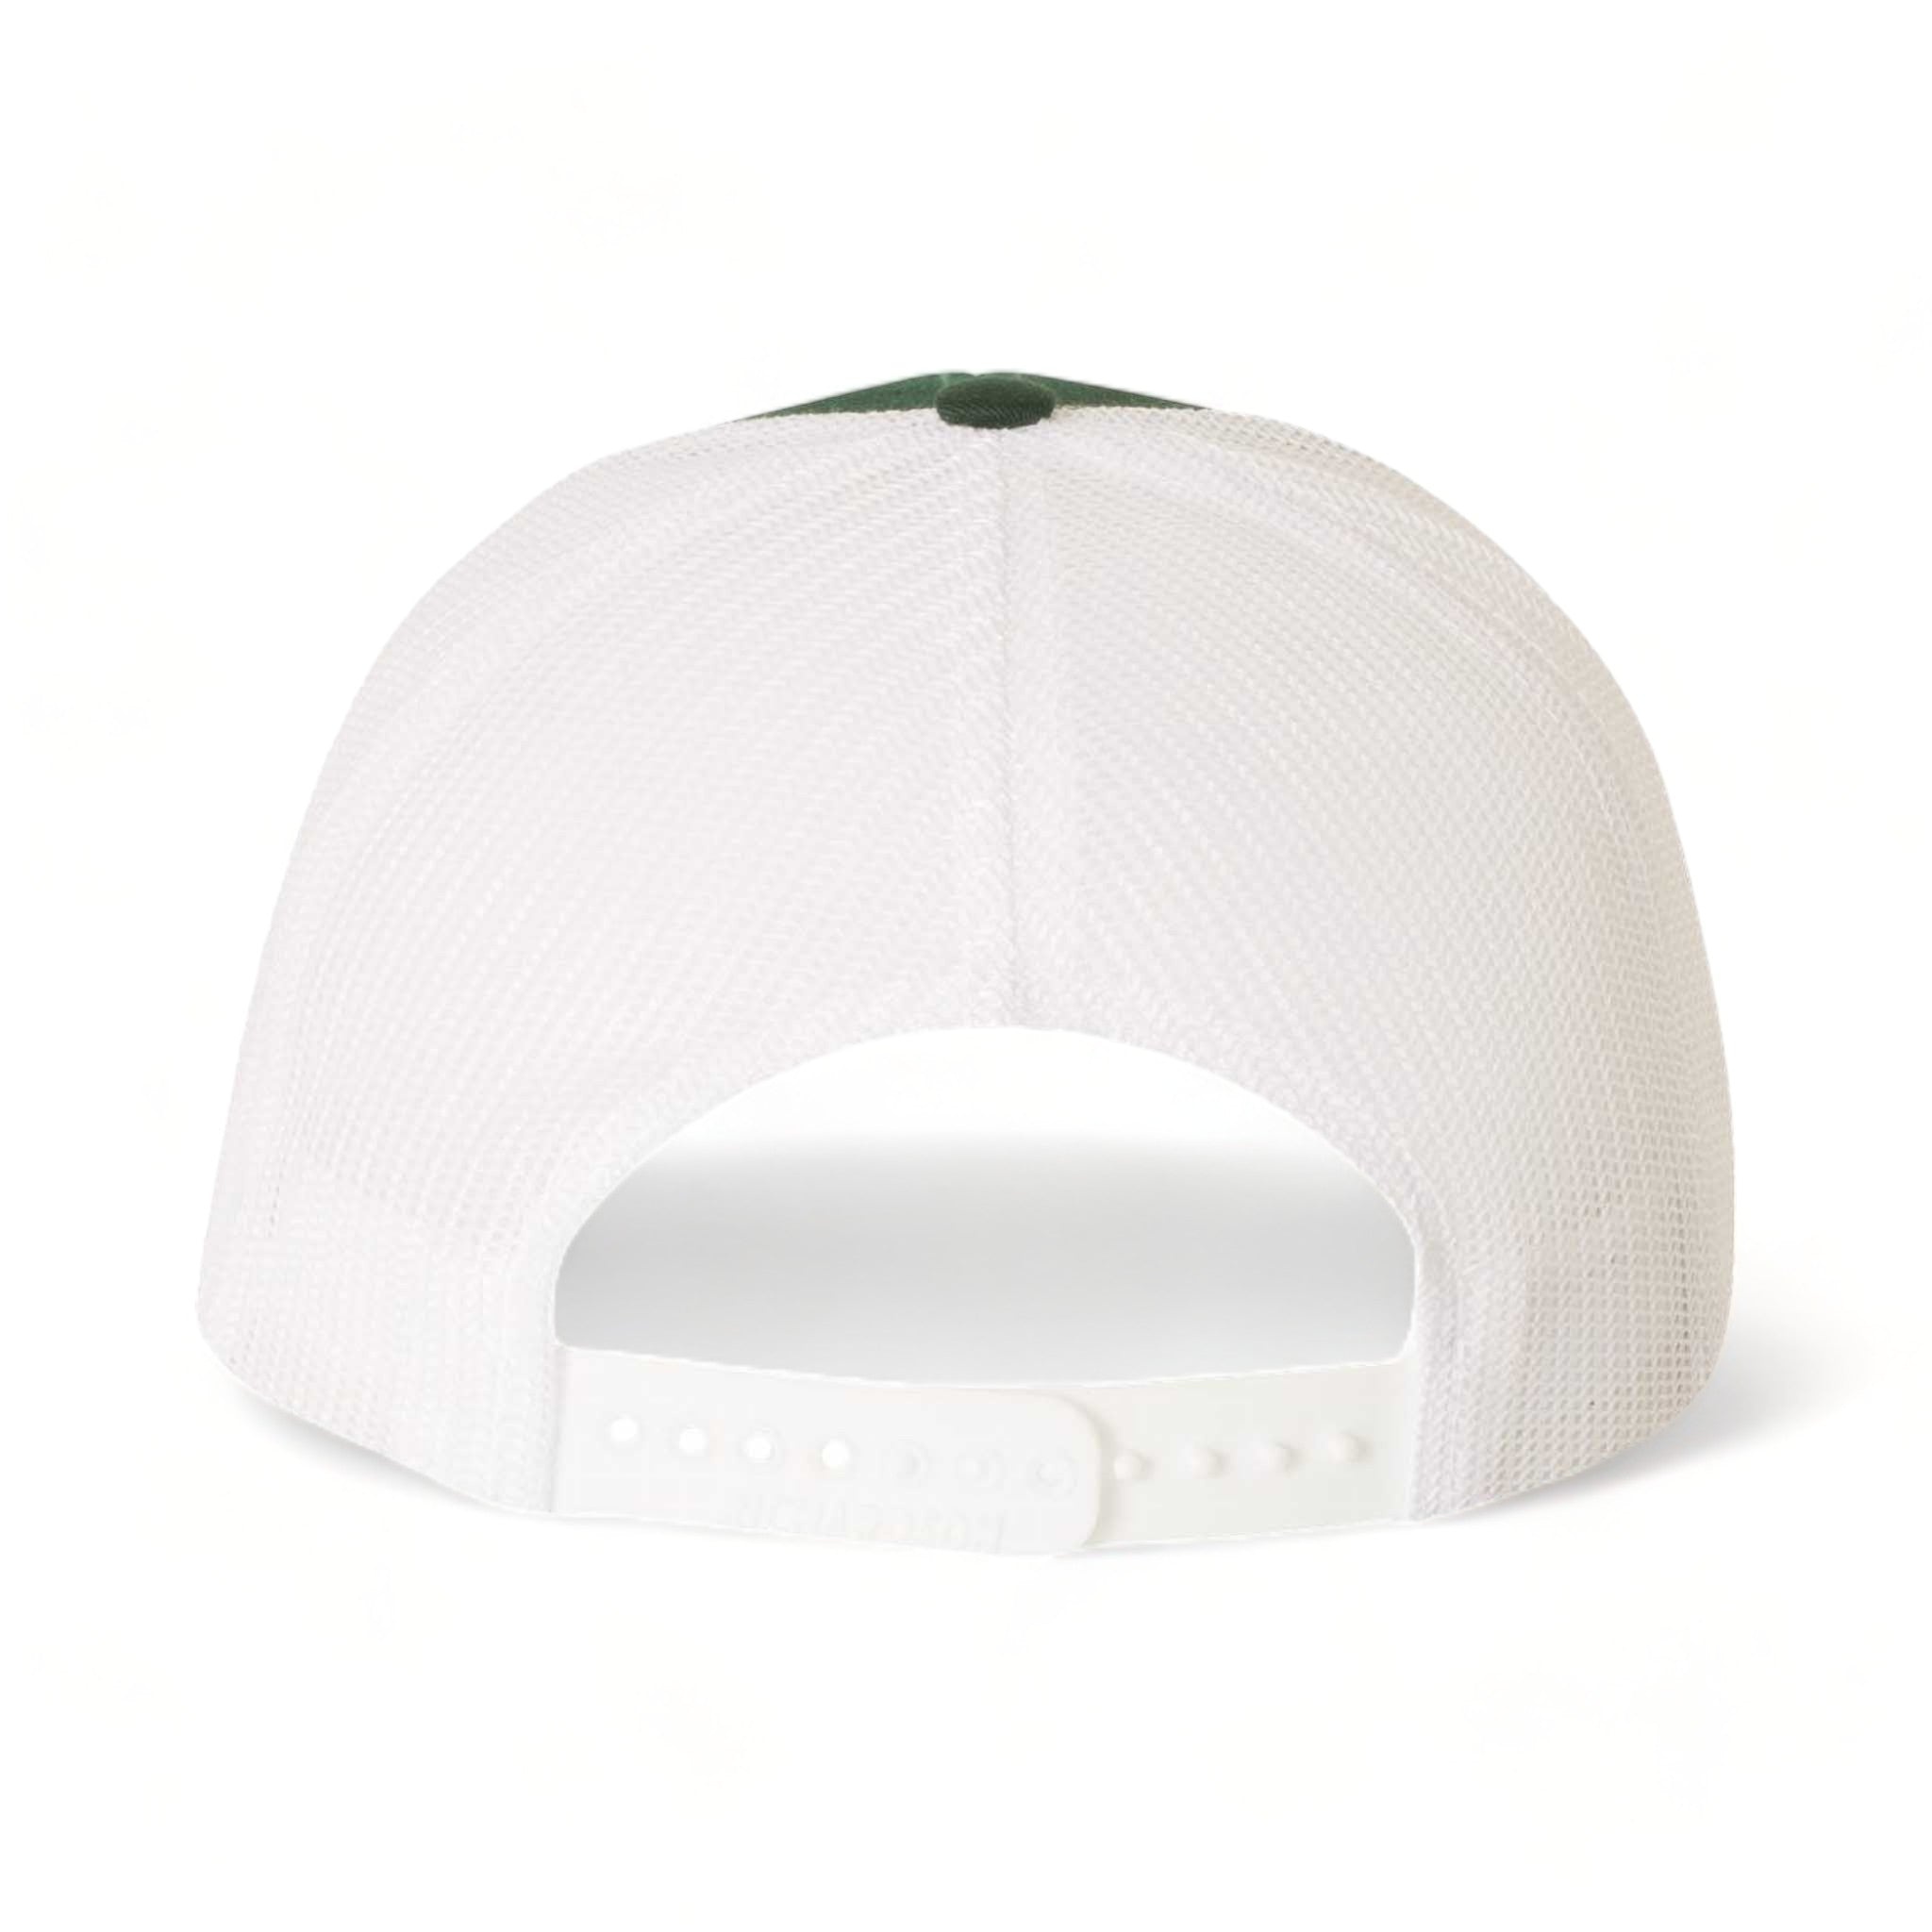 Back view of Richardson 112 custom hat in dark green and white